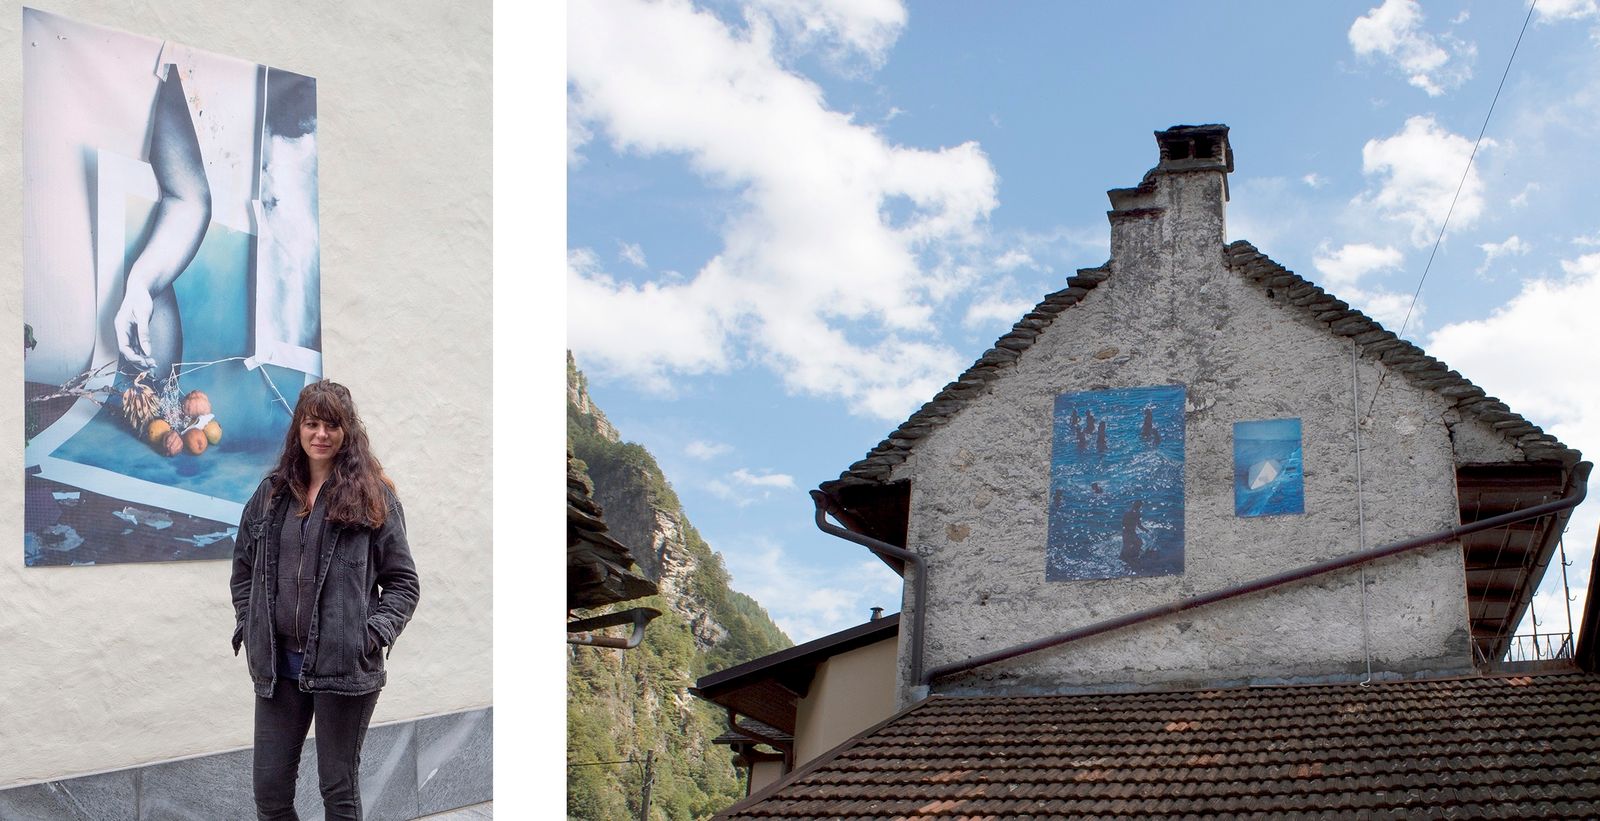 Ayline Olukman giving a guided tour of her solo show during Verzasca FOTO 2019, Sonogno, Switzerland.